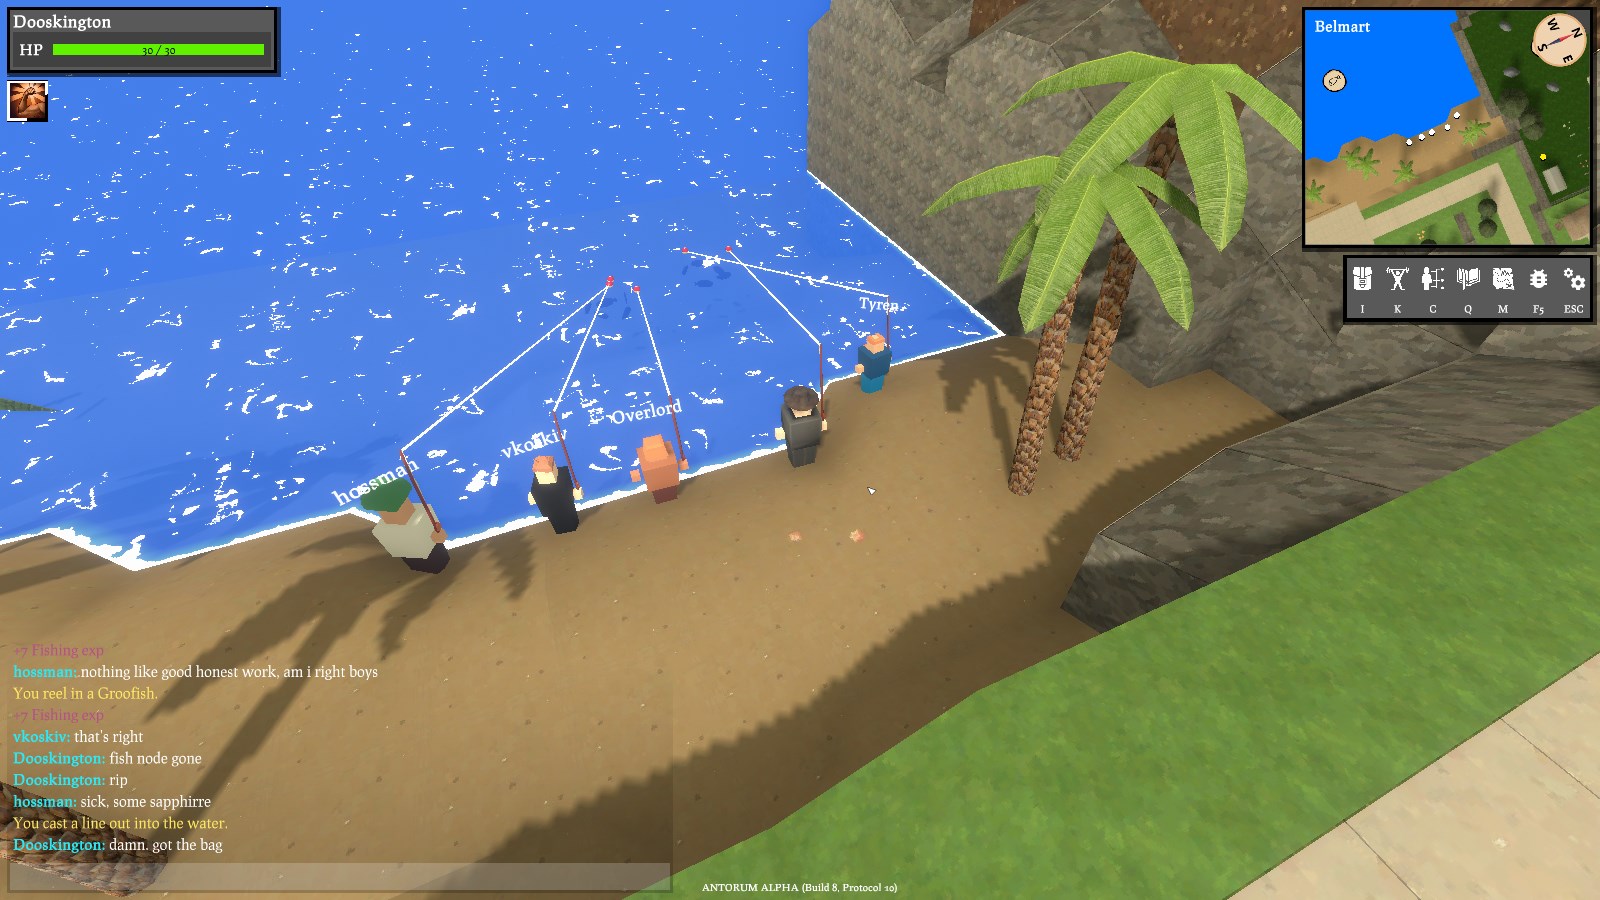 Some players fishing at the beach